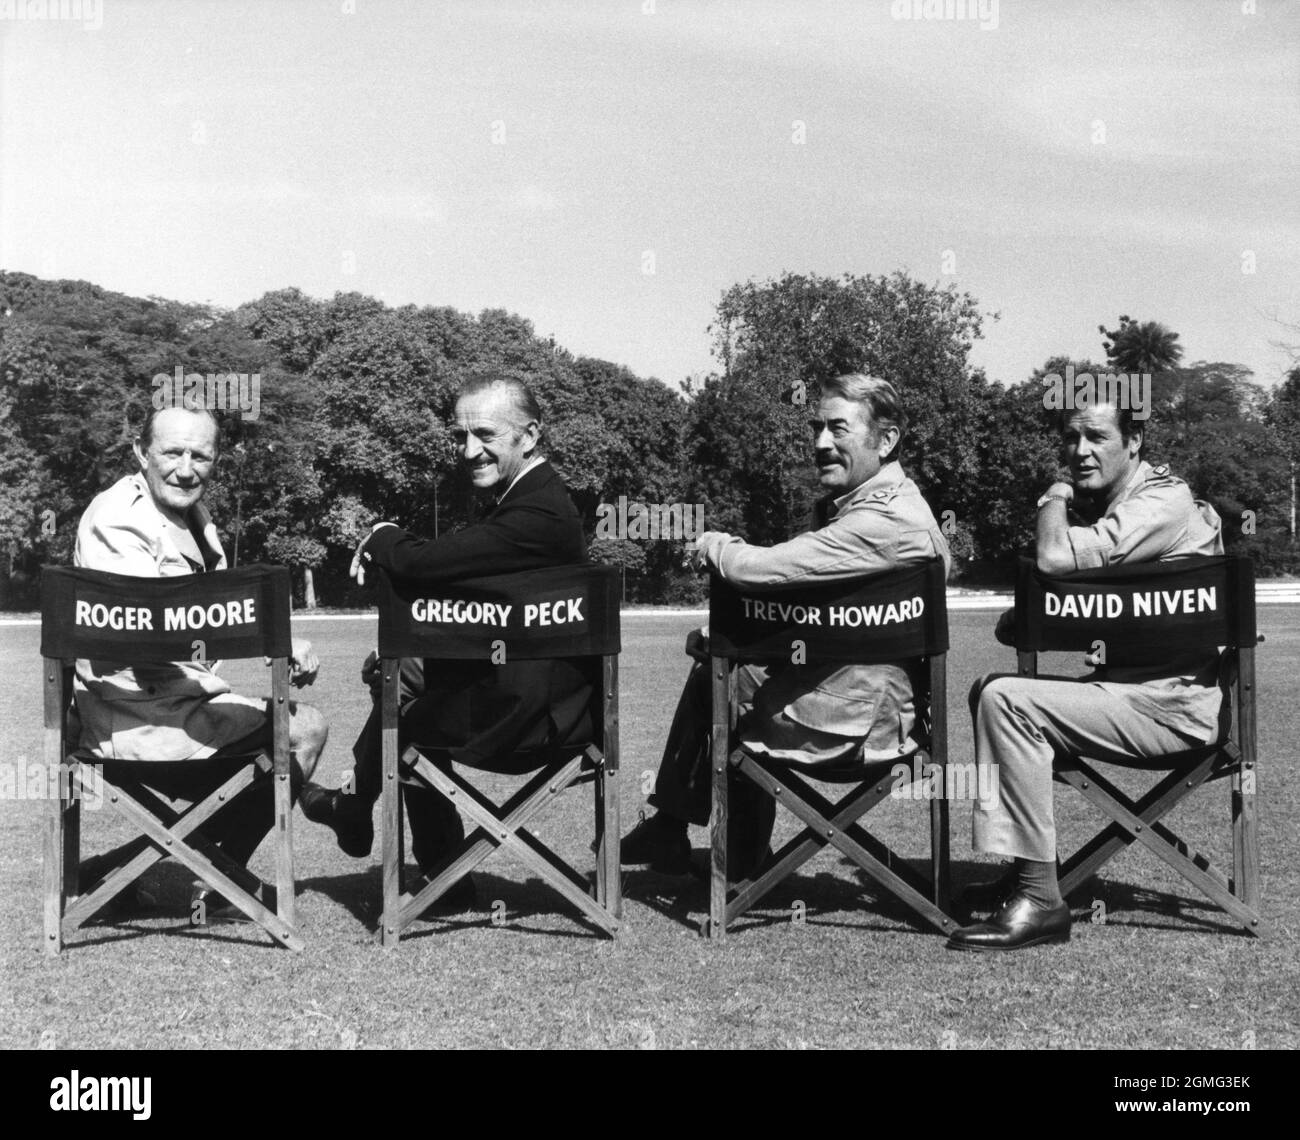 TREVOR HOWARD DAVID NIVEN GREGORY PECK and ROGER MOORE on set location candid portrait during filming of THE SEA WOLVES 1980 director ANDREW V. McLAGLEN book Boarding Party by James Leasor screenplay Reginald Rose producer Euan Lloyd Switzerland - UK - USA co-production Lorimar Productions / Richmond Light Horse Productions / Varius Entertainment Trading A.G. / Rank Film Distributors Stock Photo